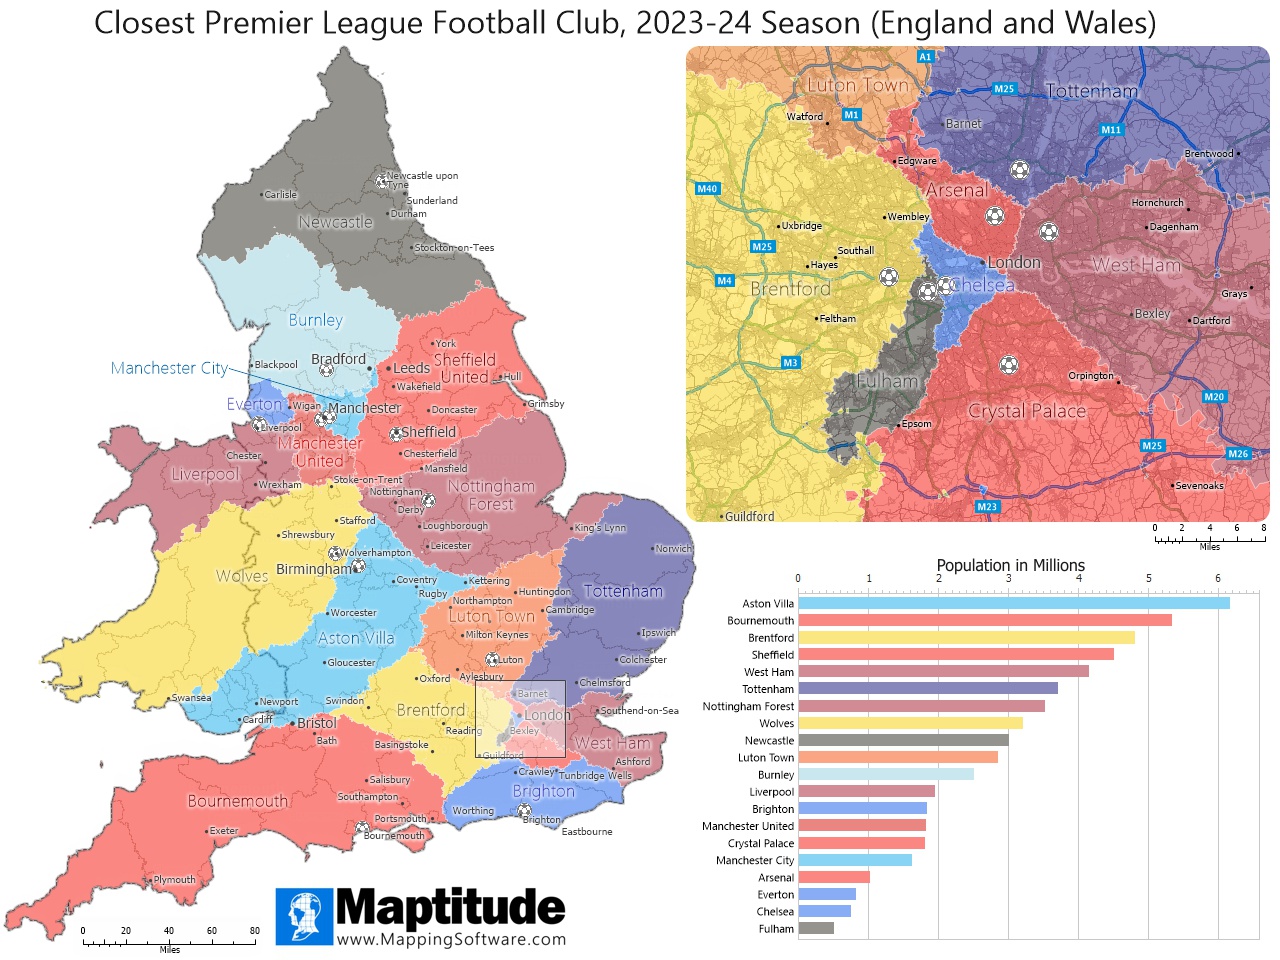 Maptitude mapping software infographic showing the Closest Premier League Football Club by drive time